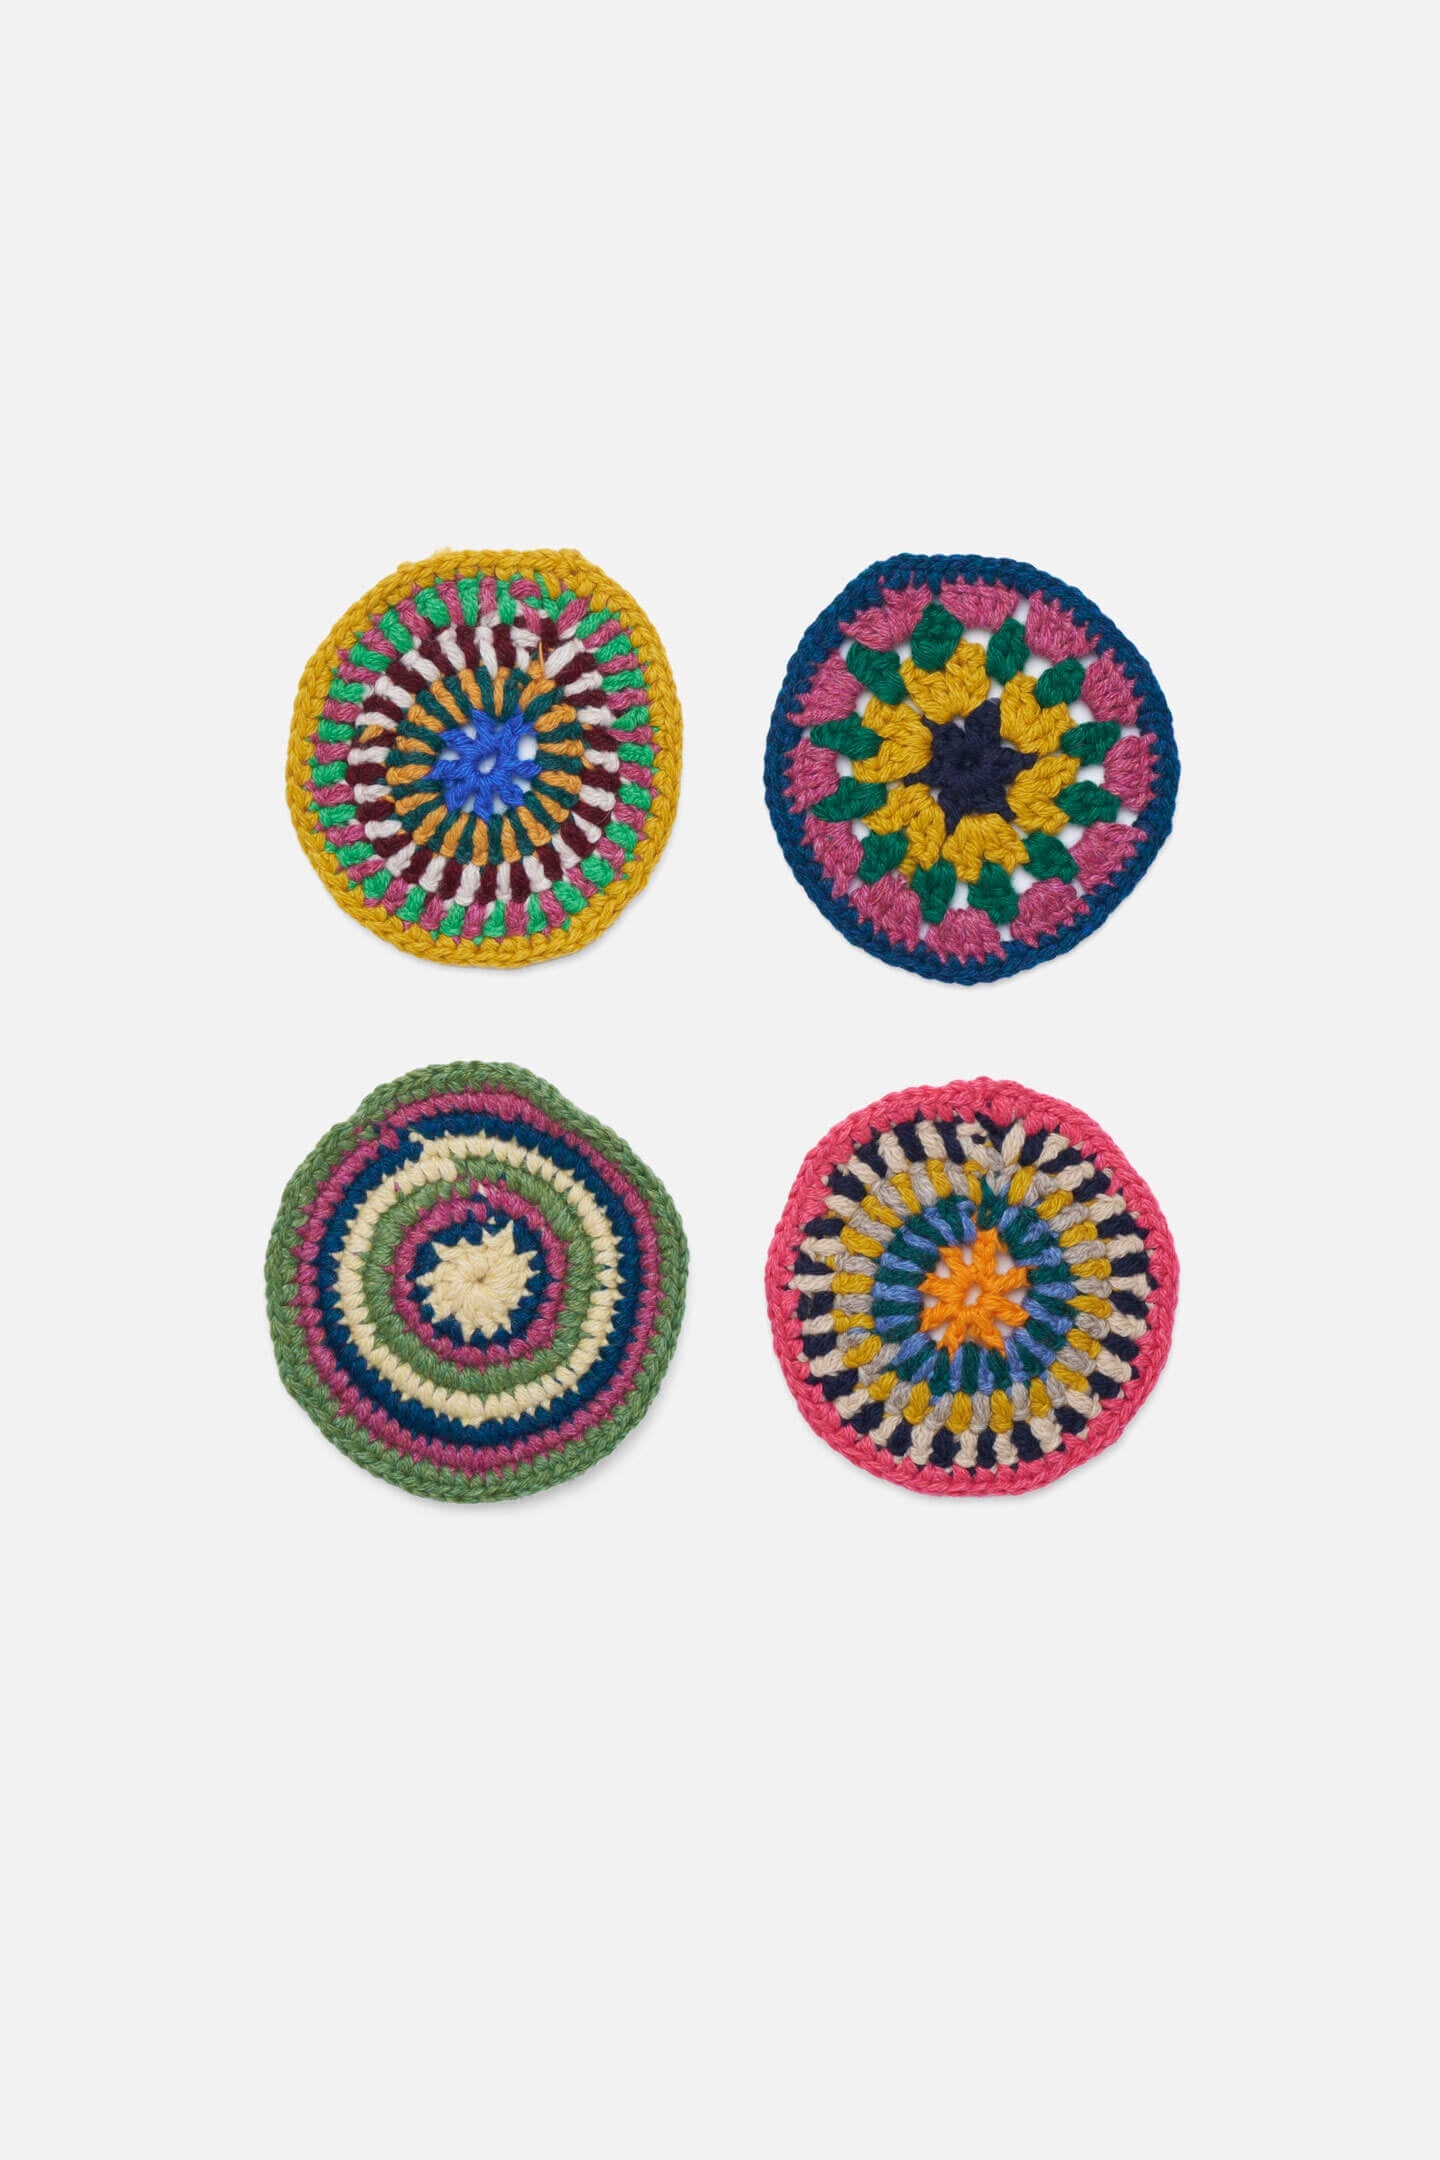 4 PACK CROCHET ROUND COASTERS - 1